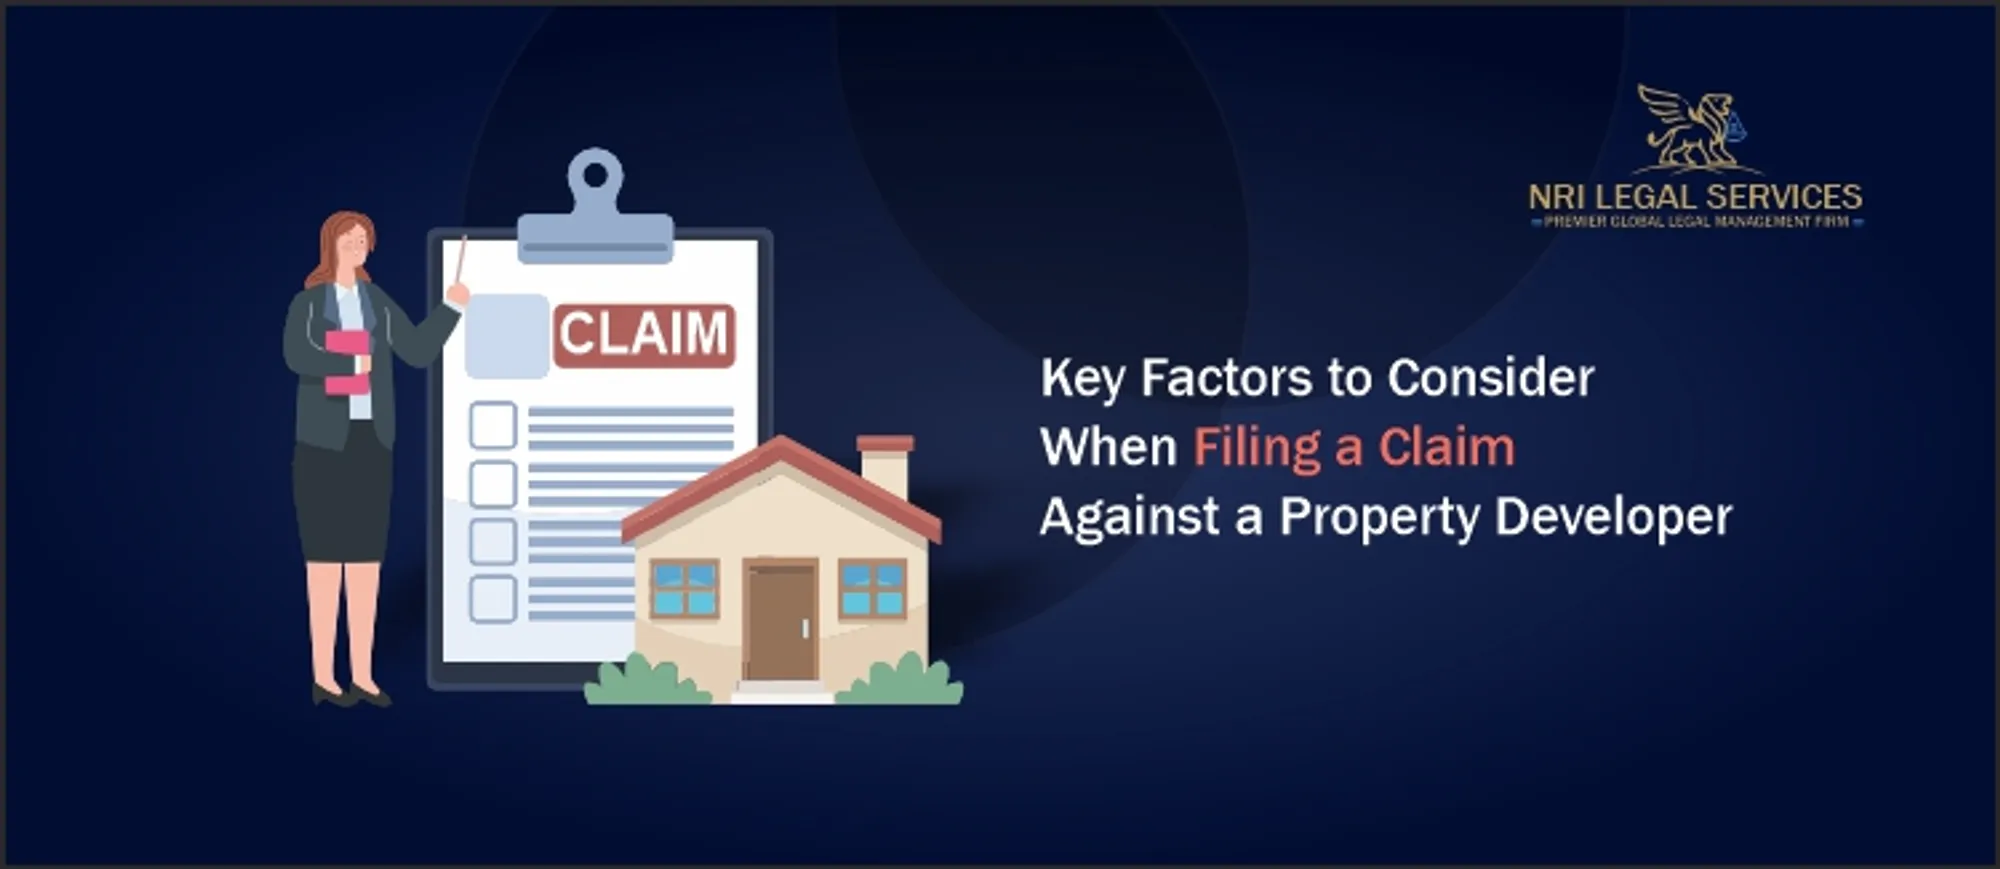 Key Factors to Consider When Filing a Claim Against a Property Developer